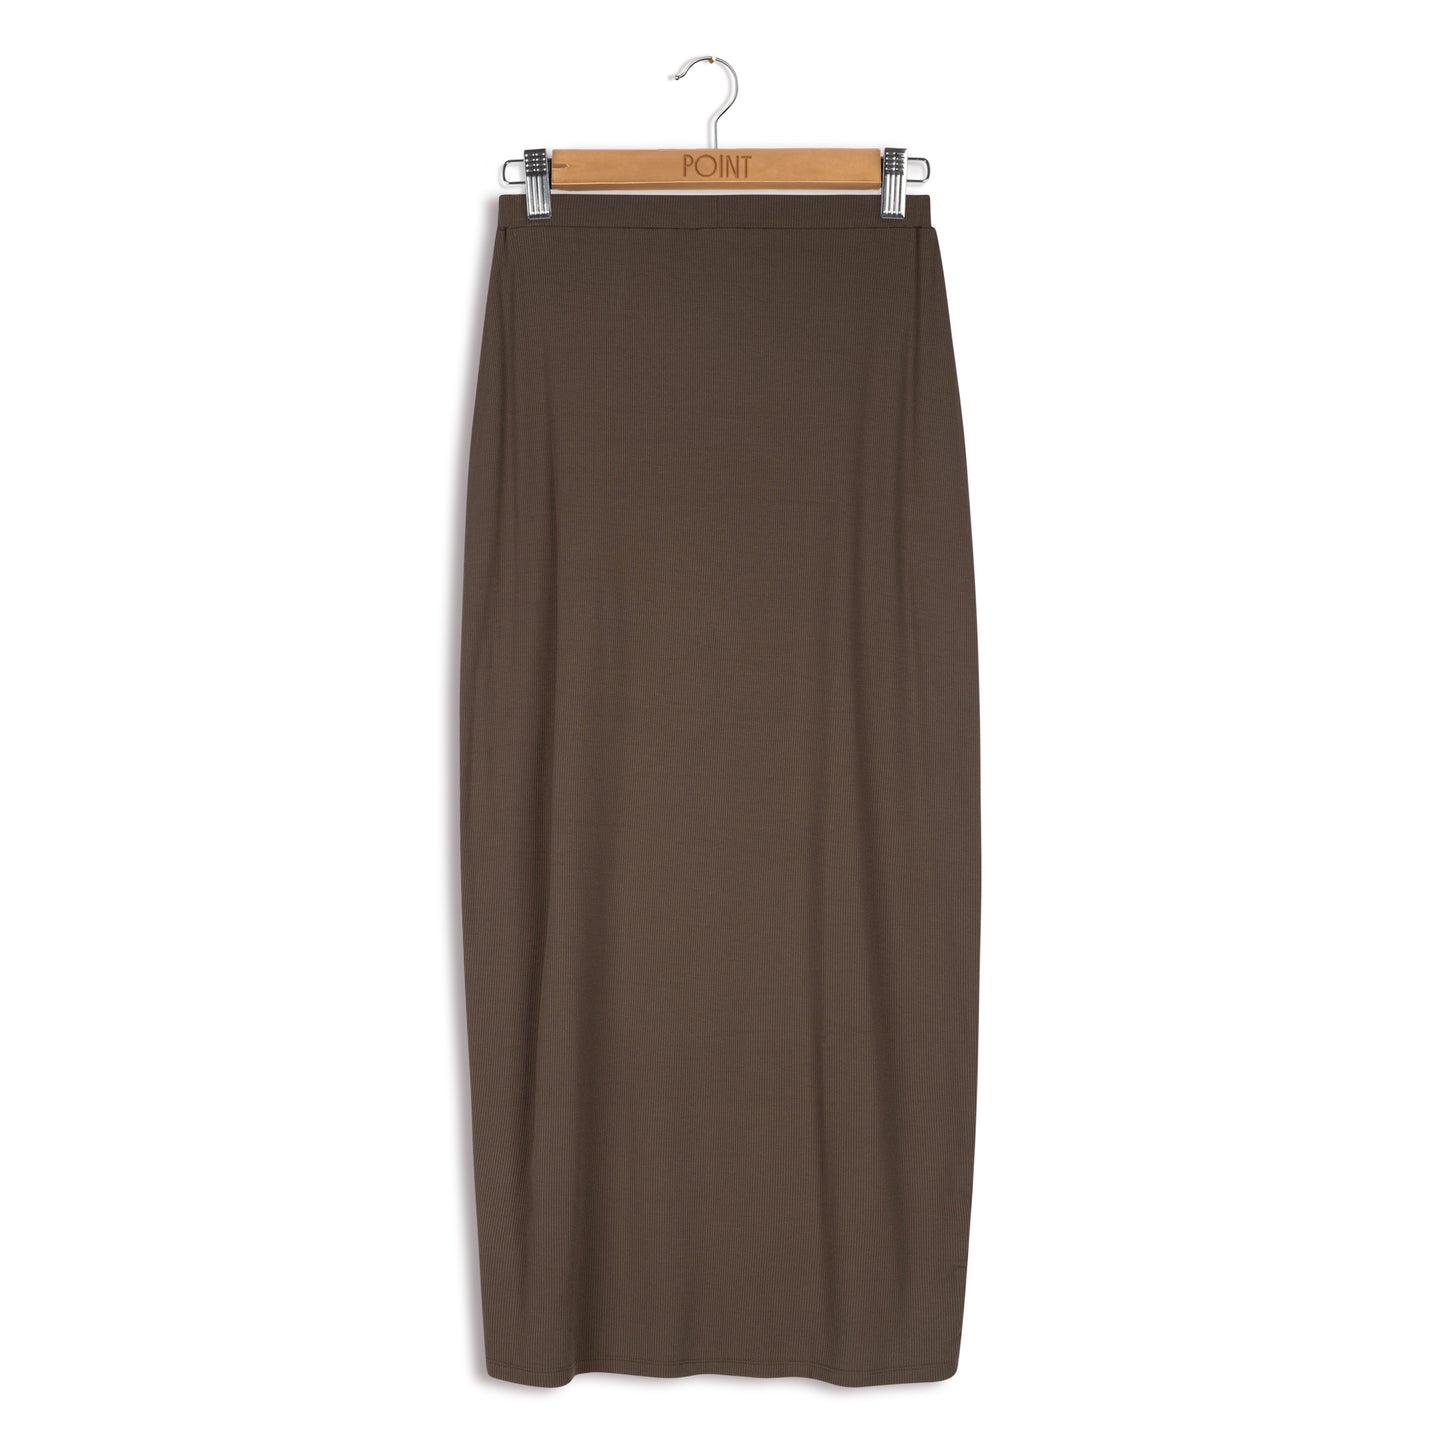 POINT SIDE TIE MAXI SKIRT